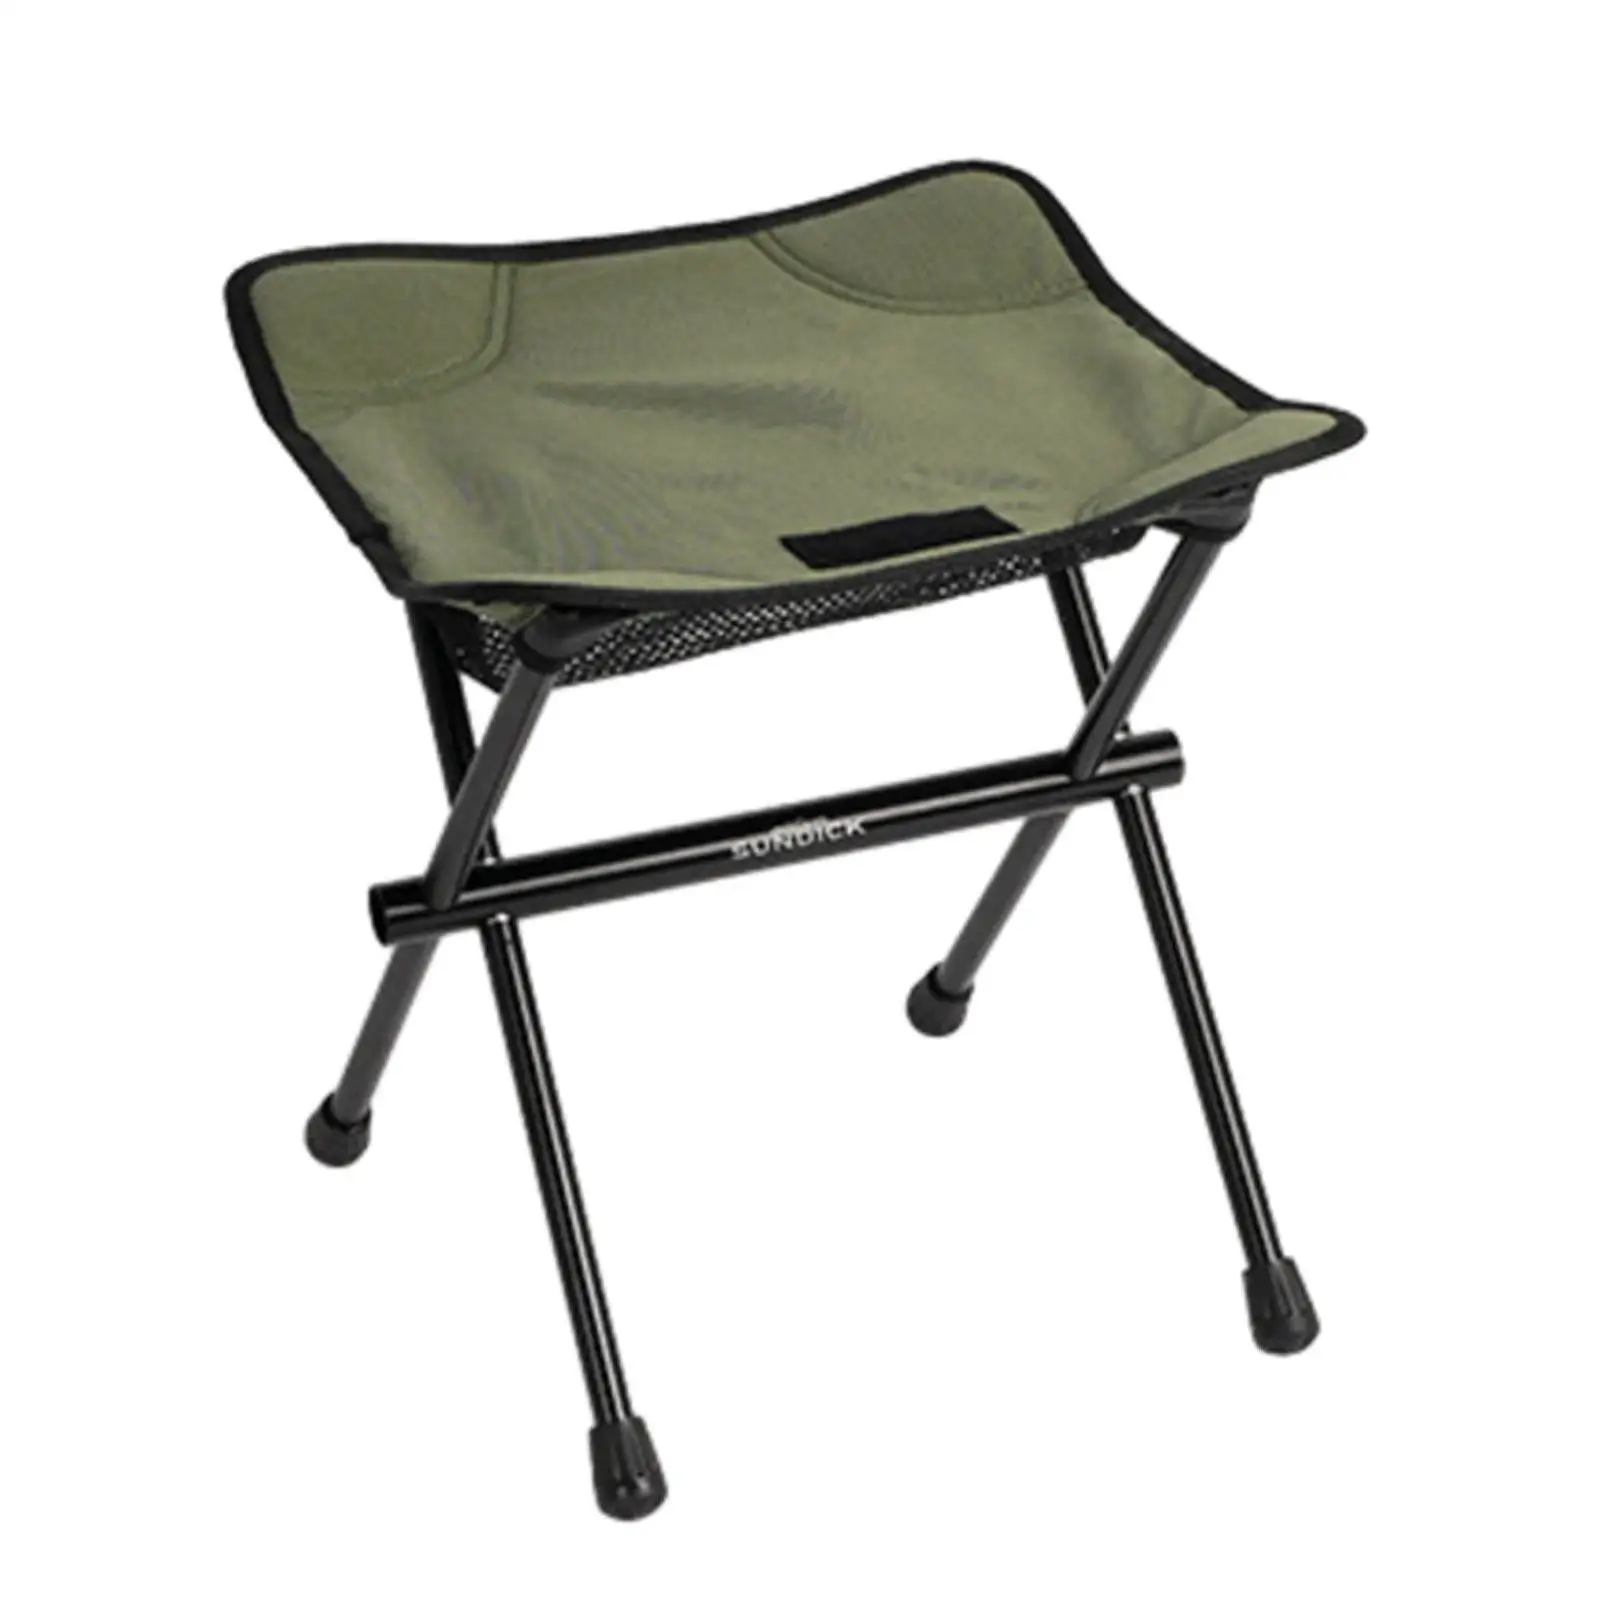 Camping Folding Stool Adults Foot Rest Footrest under Desk Footstool Compact Fishing Chair for Hiking Beach Garden Lawn Sports